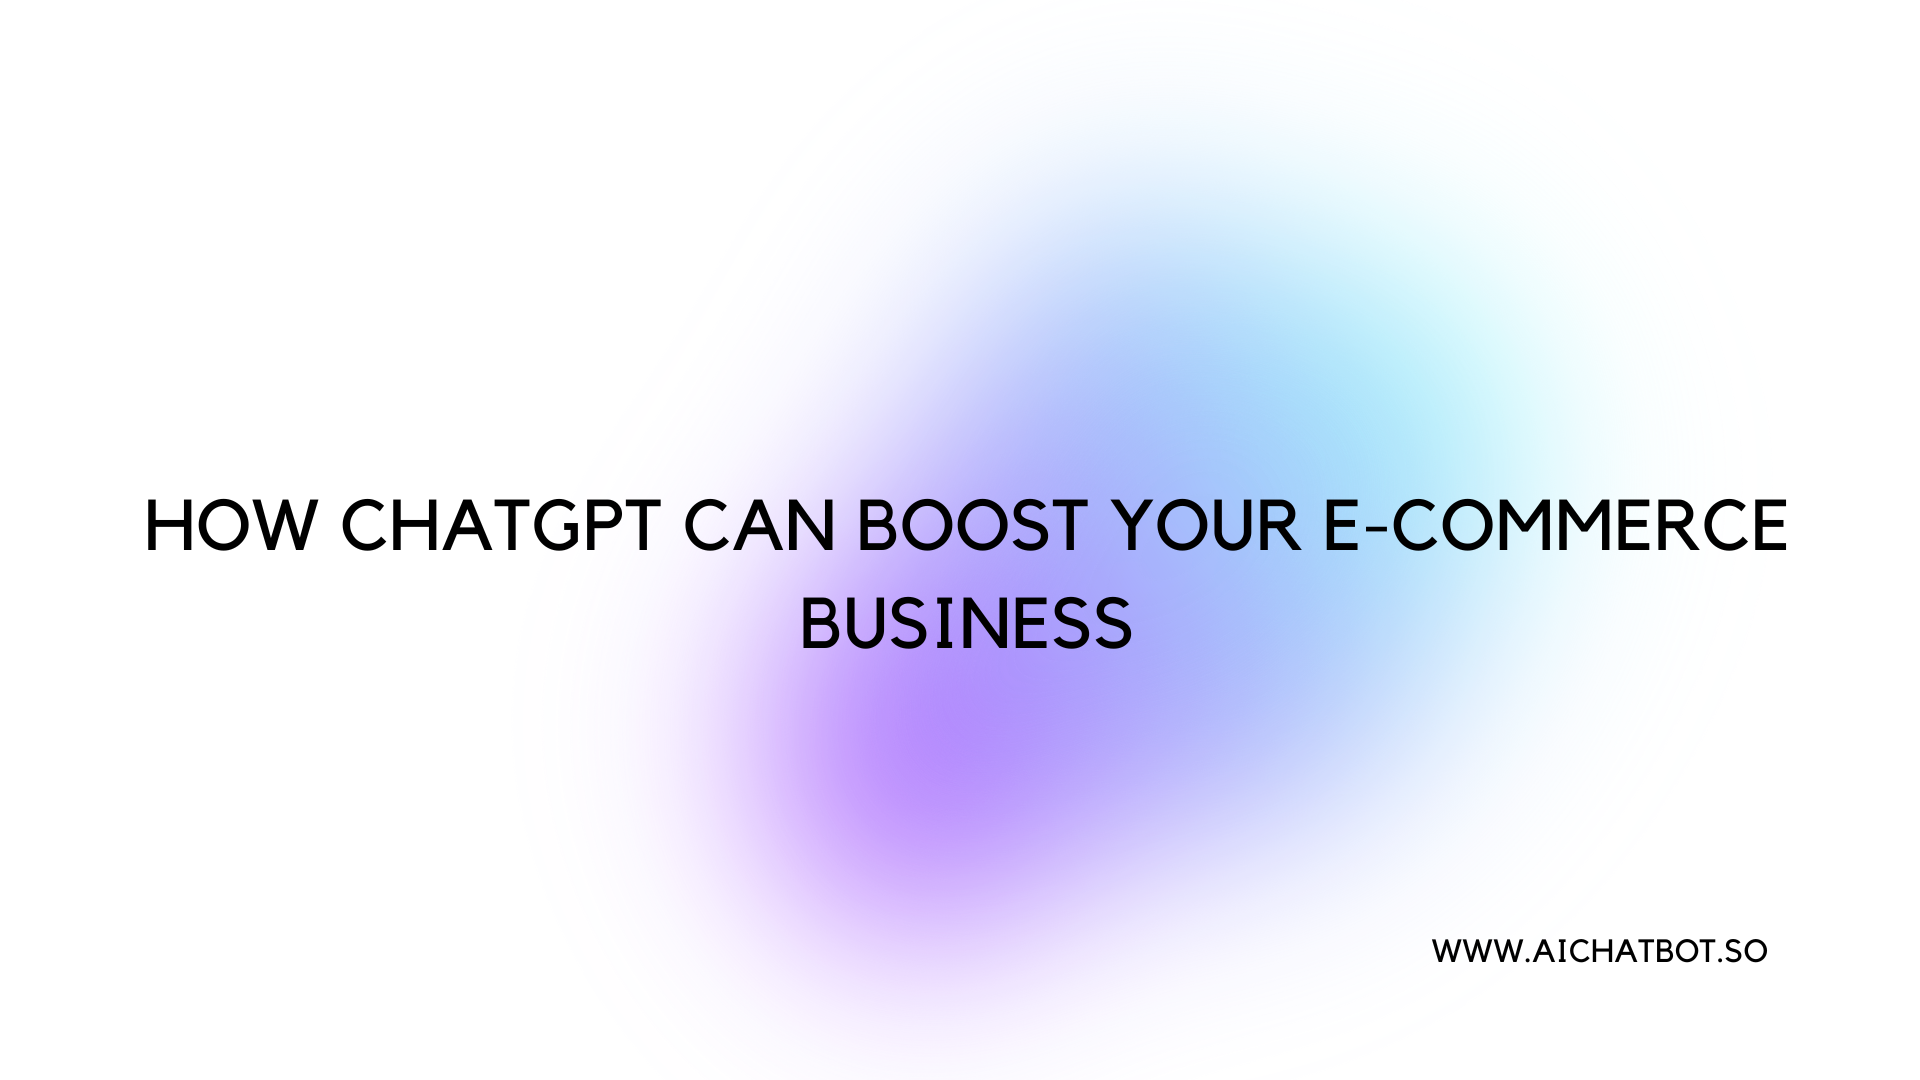 How chatgbt can transform your ecommerce business